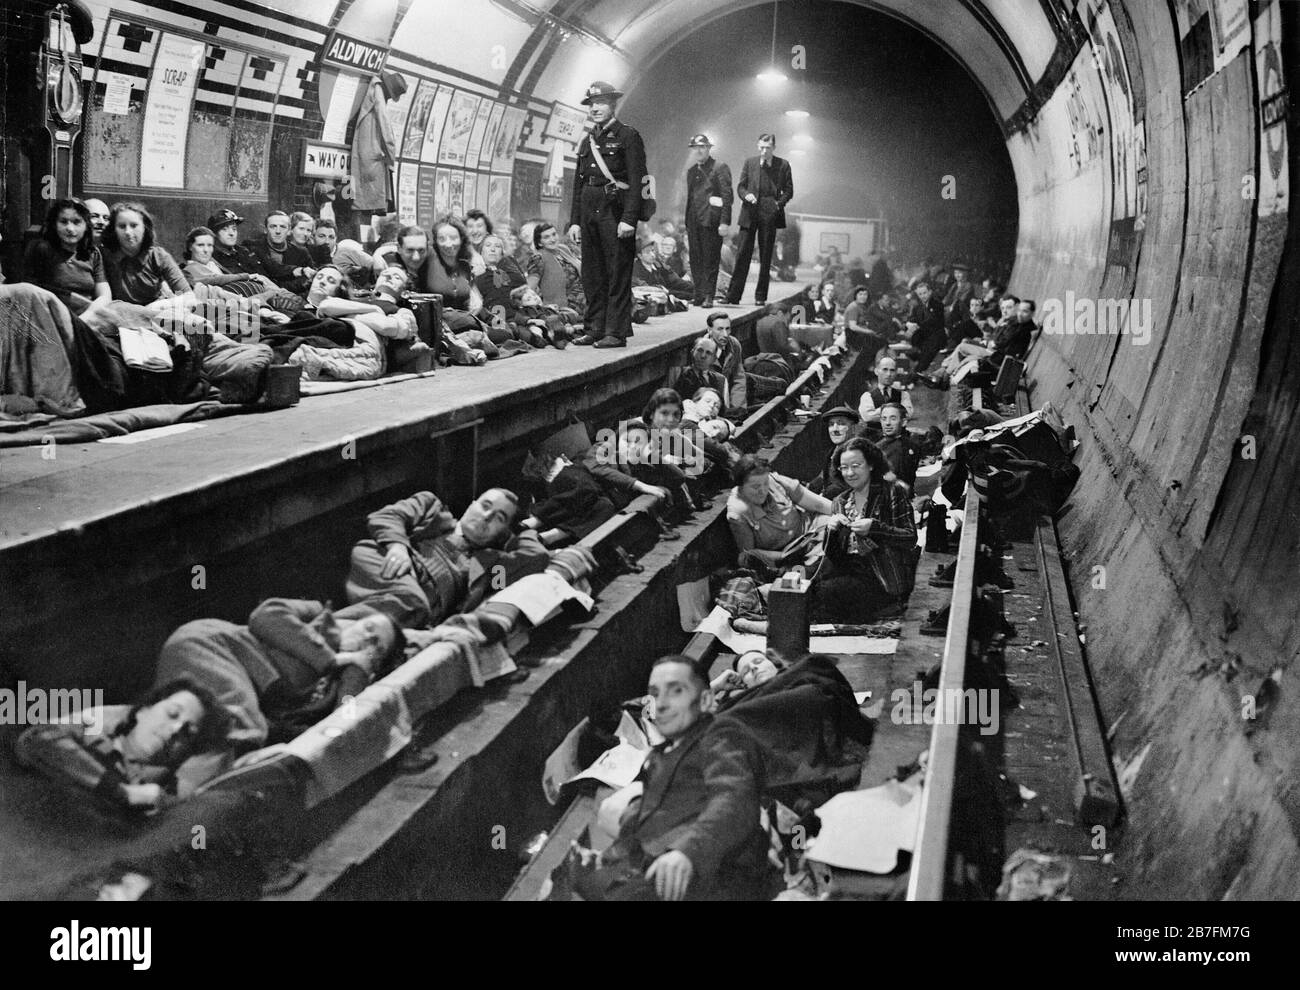 The scene at Aldwych tube station 1940. Seventy nine tube stations were used as air raid shelters by Londoners, but they were not proof against a direct hit. Stock Photo